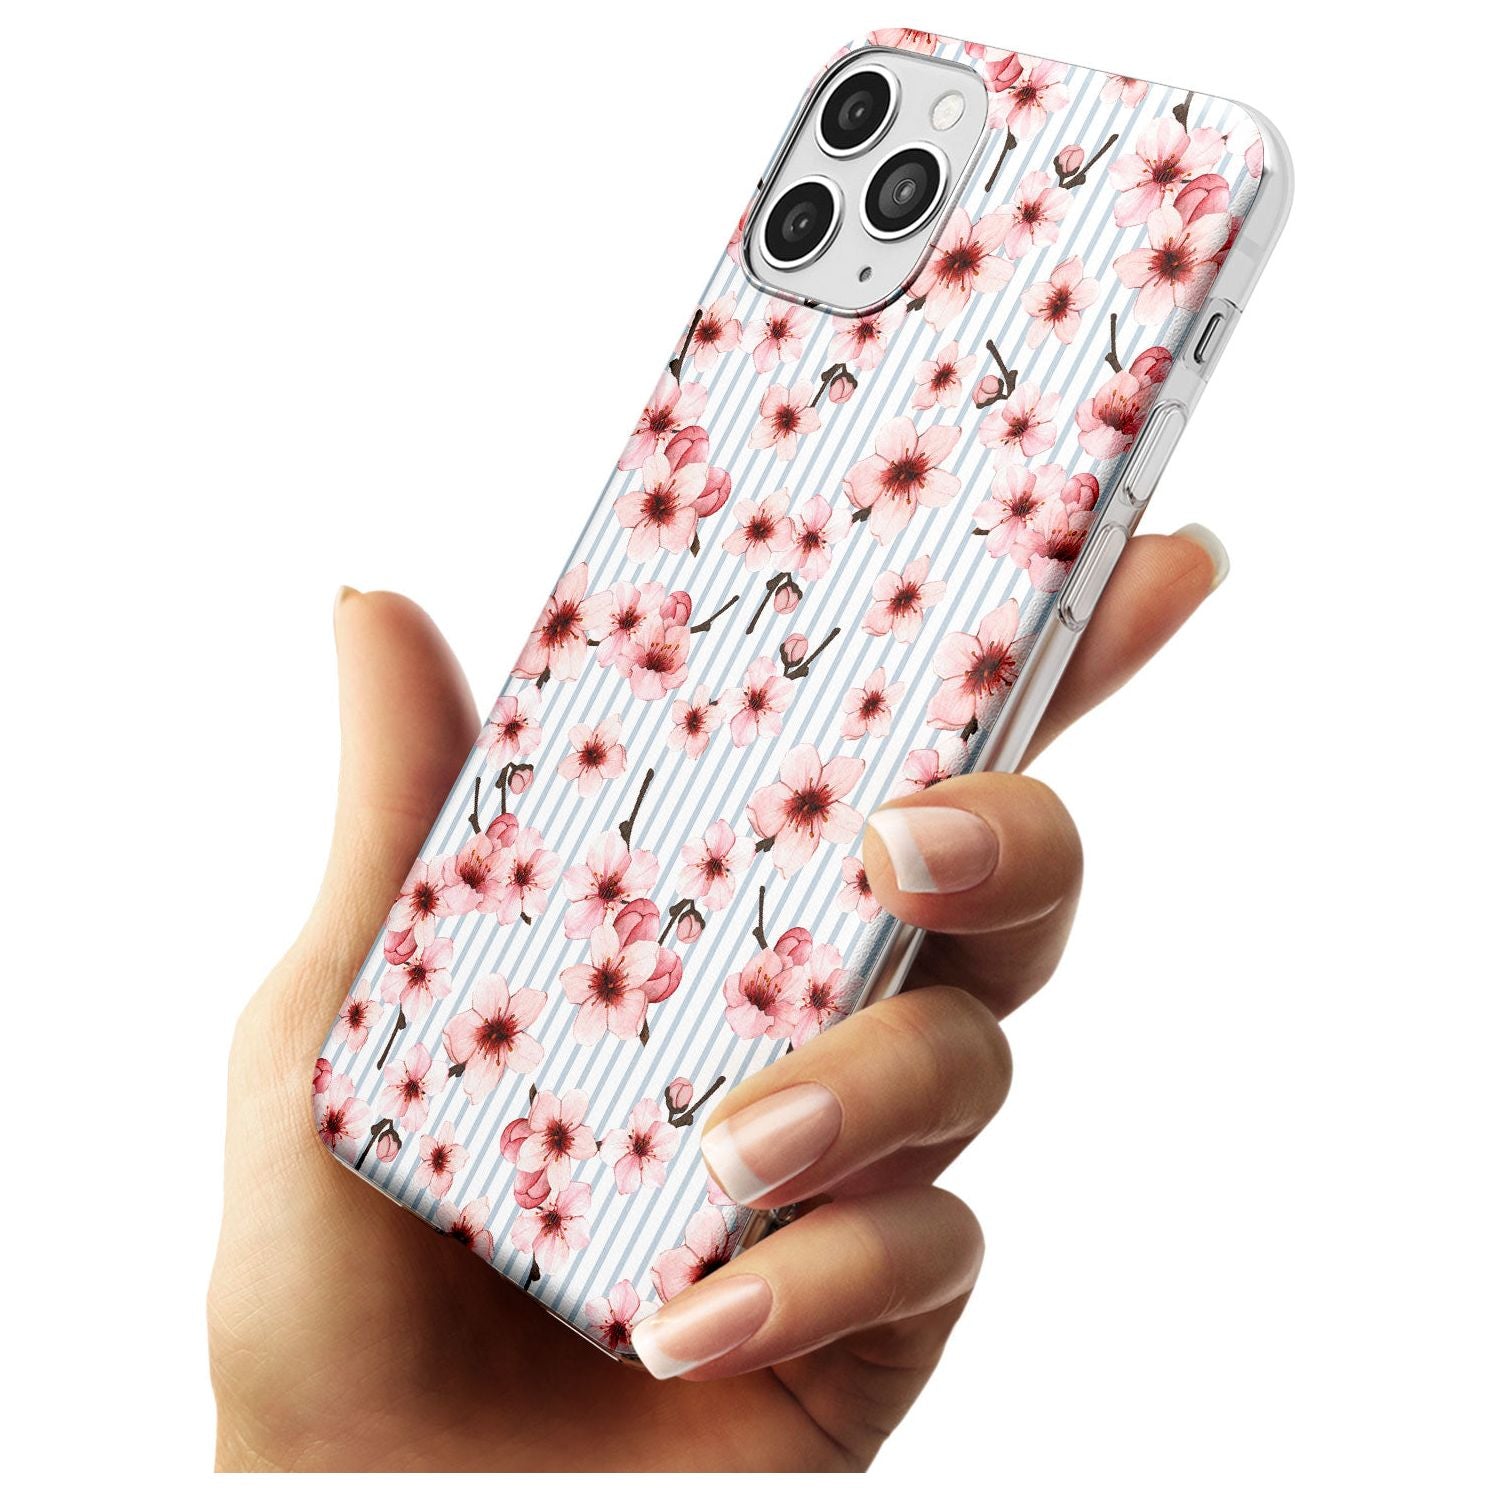 Cherry Blossoms on Blue Stripes Pattern Slim TPU Phone Case for iPhone 11 Pro Max